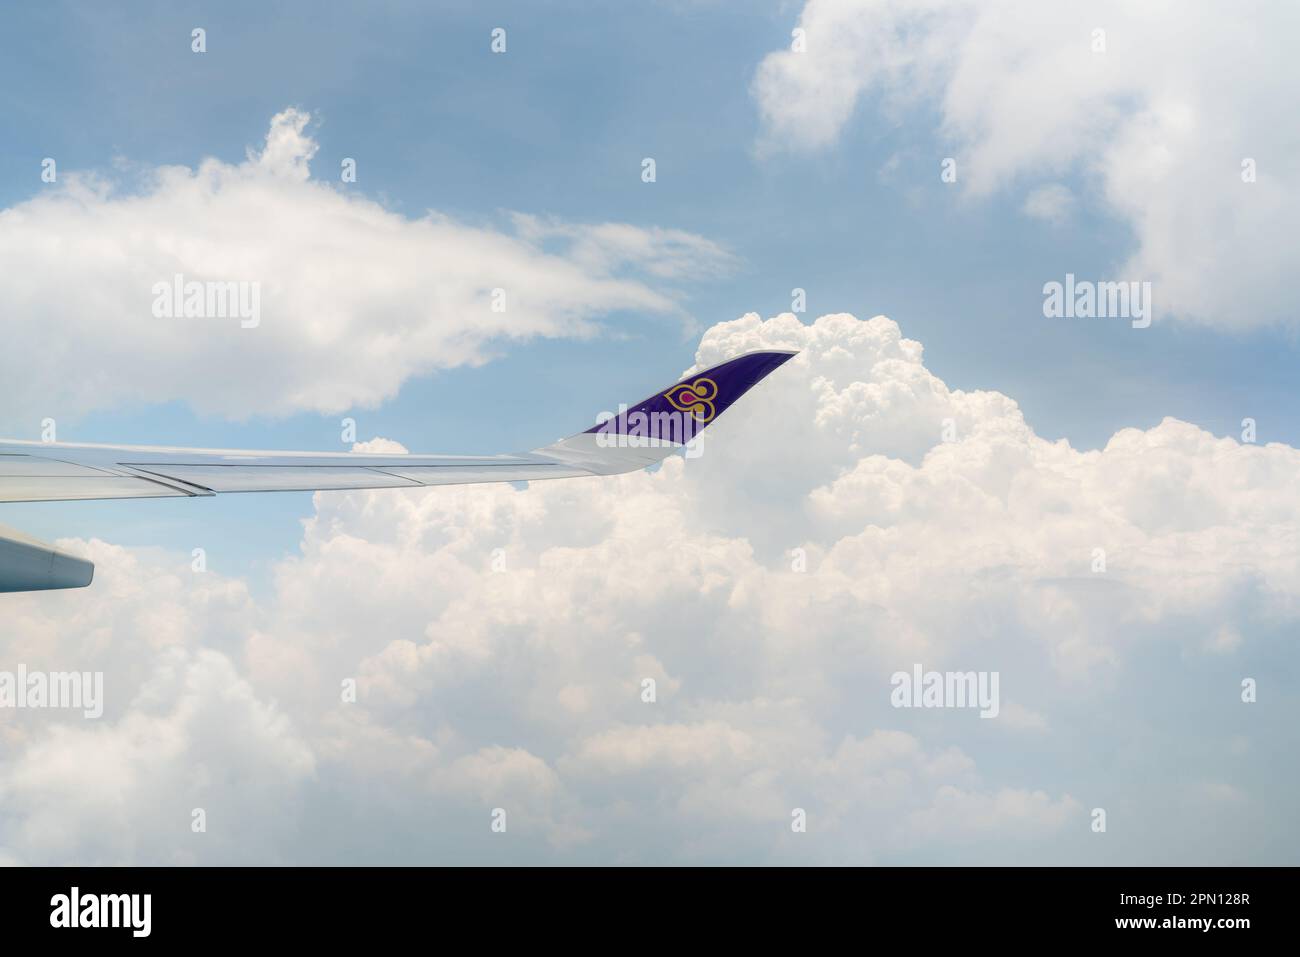 BANGKOK, THAILAND-OCTOBER 19, 2019: Plane wing of Thai Airways Airlines. Passenger plane. Wing of plane over white fluffy cumulus clouds. Airplane fly Stock Photo